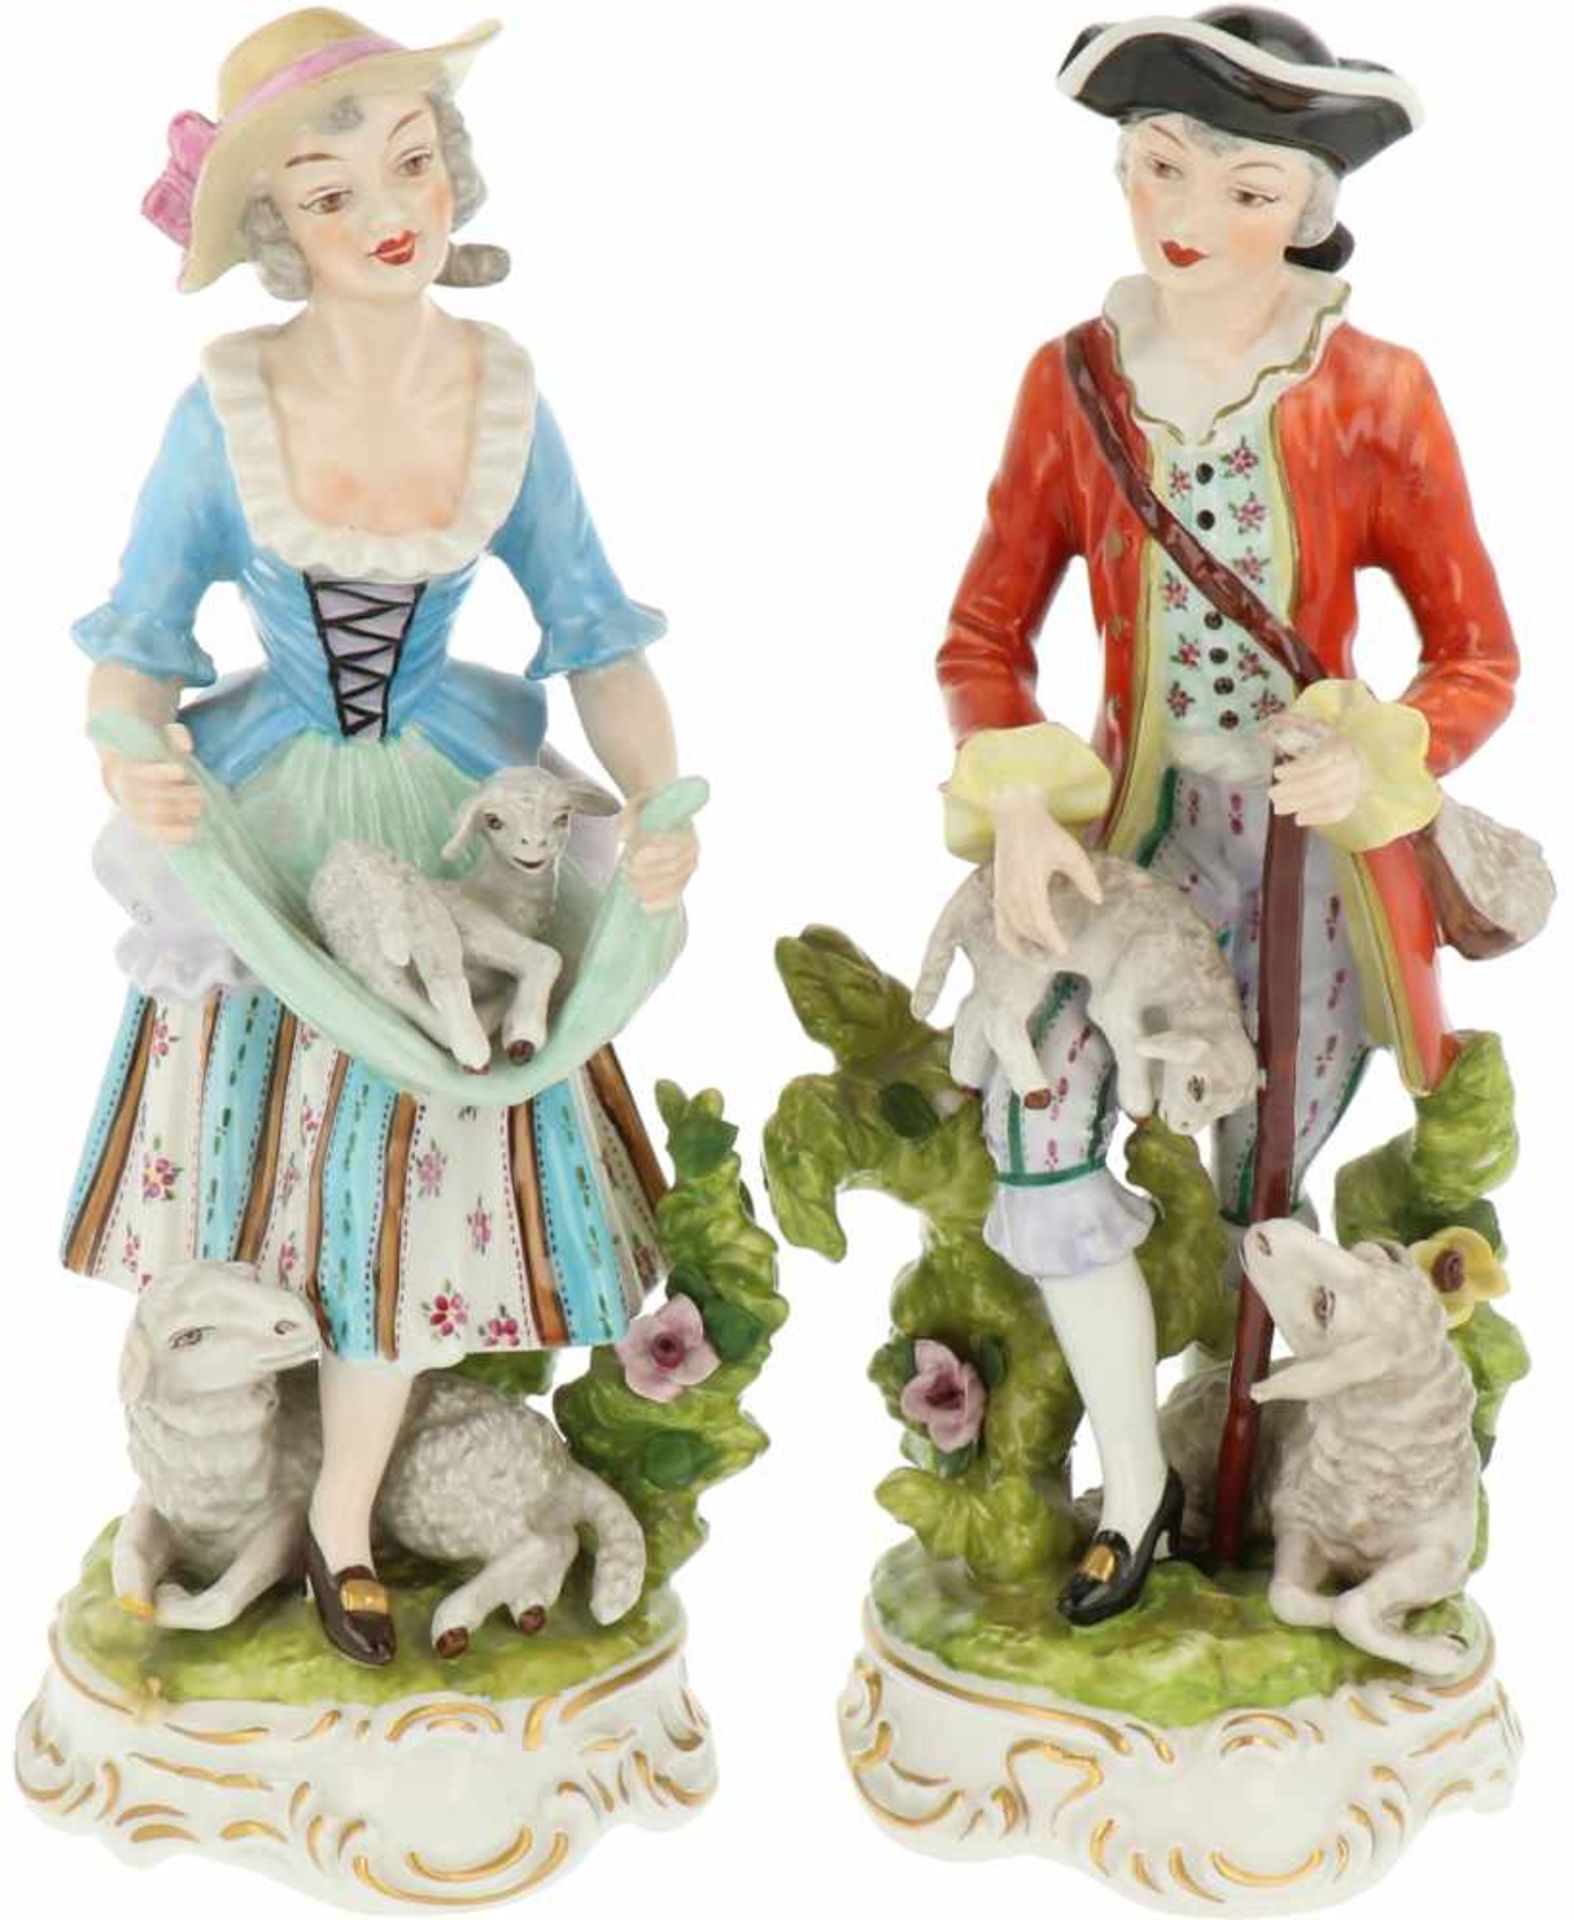 A set of procelain figurines of a lady and a gentleman with goats. Volkstedt-Rudolstadt, Germany.